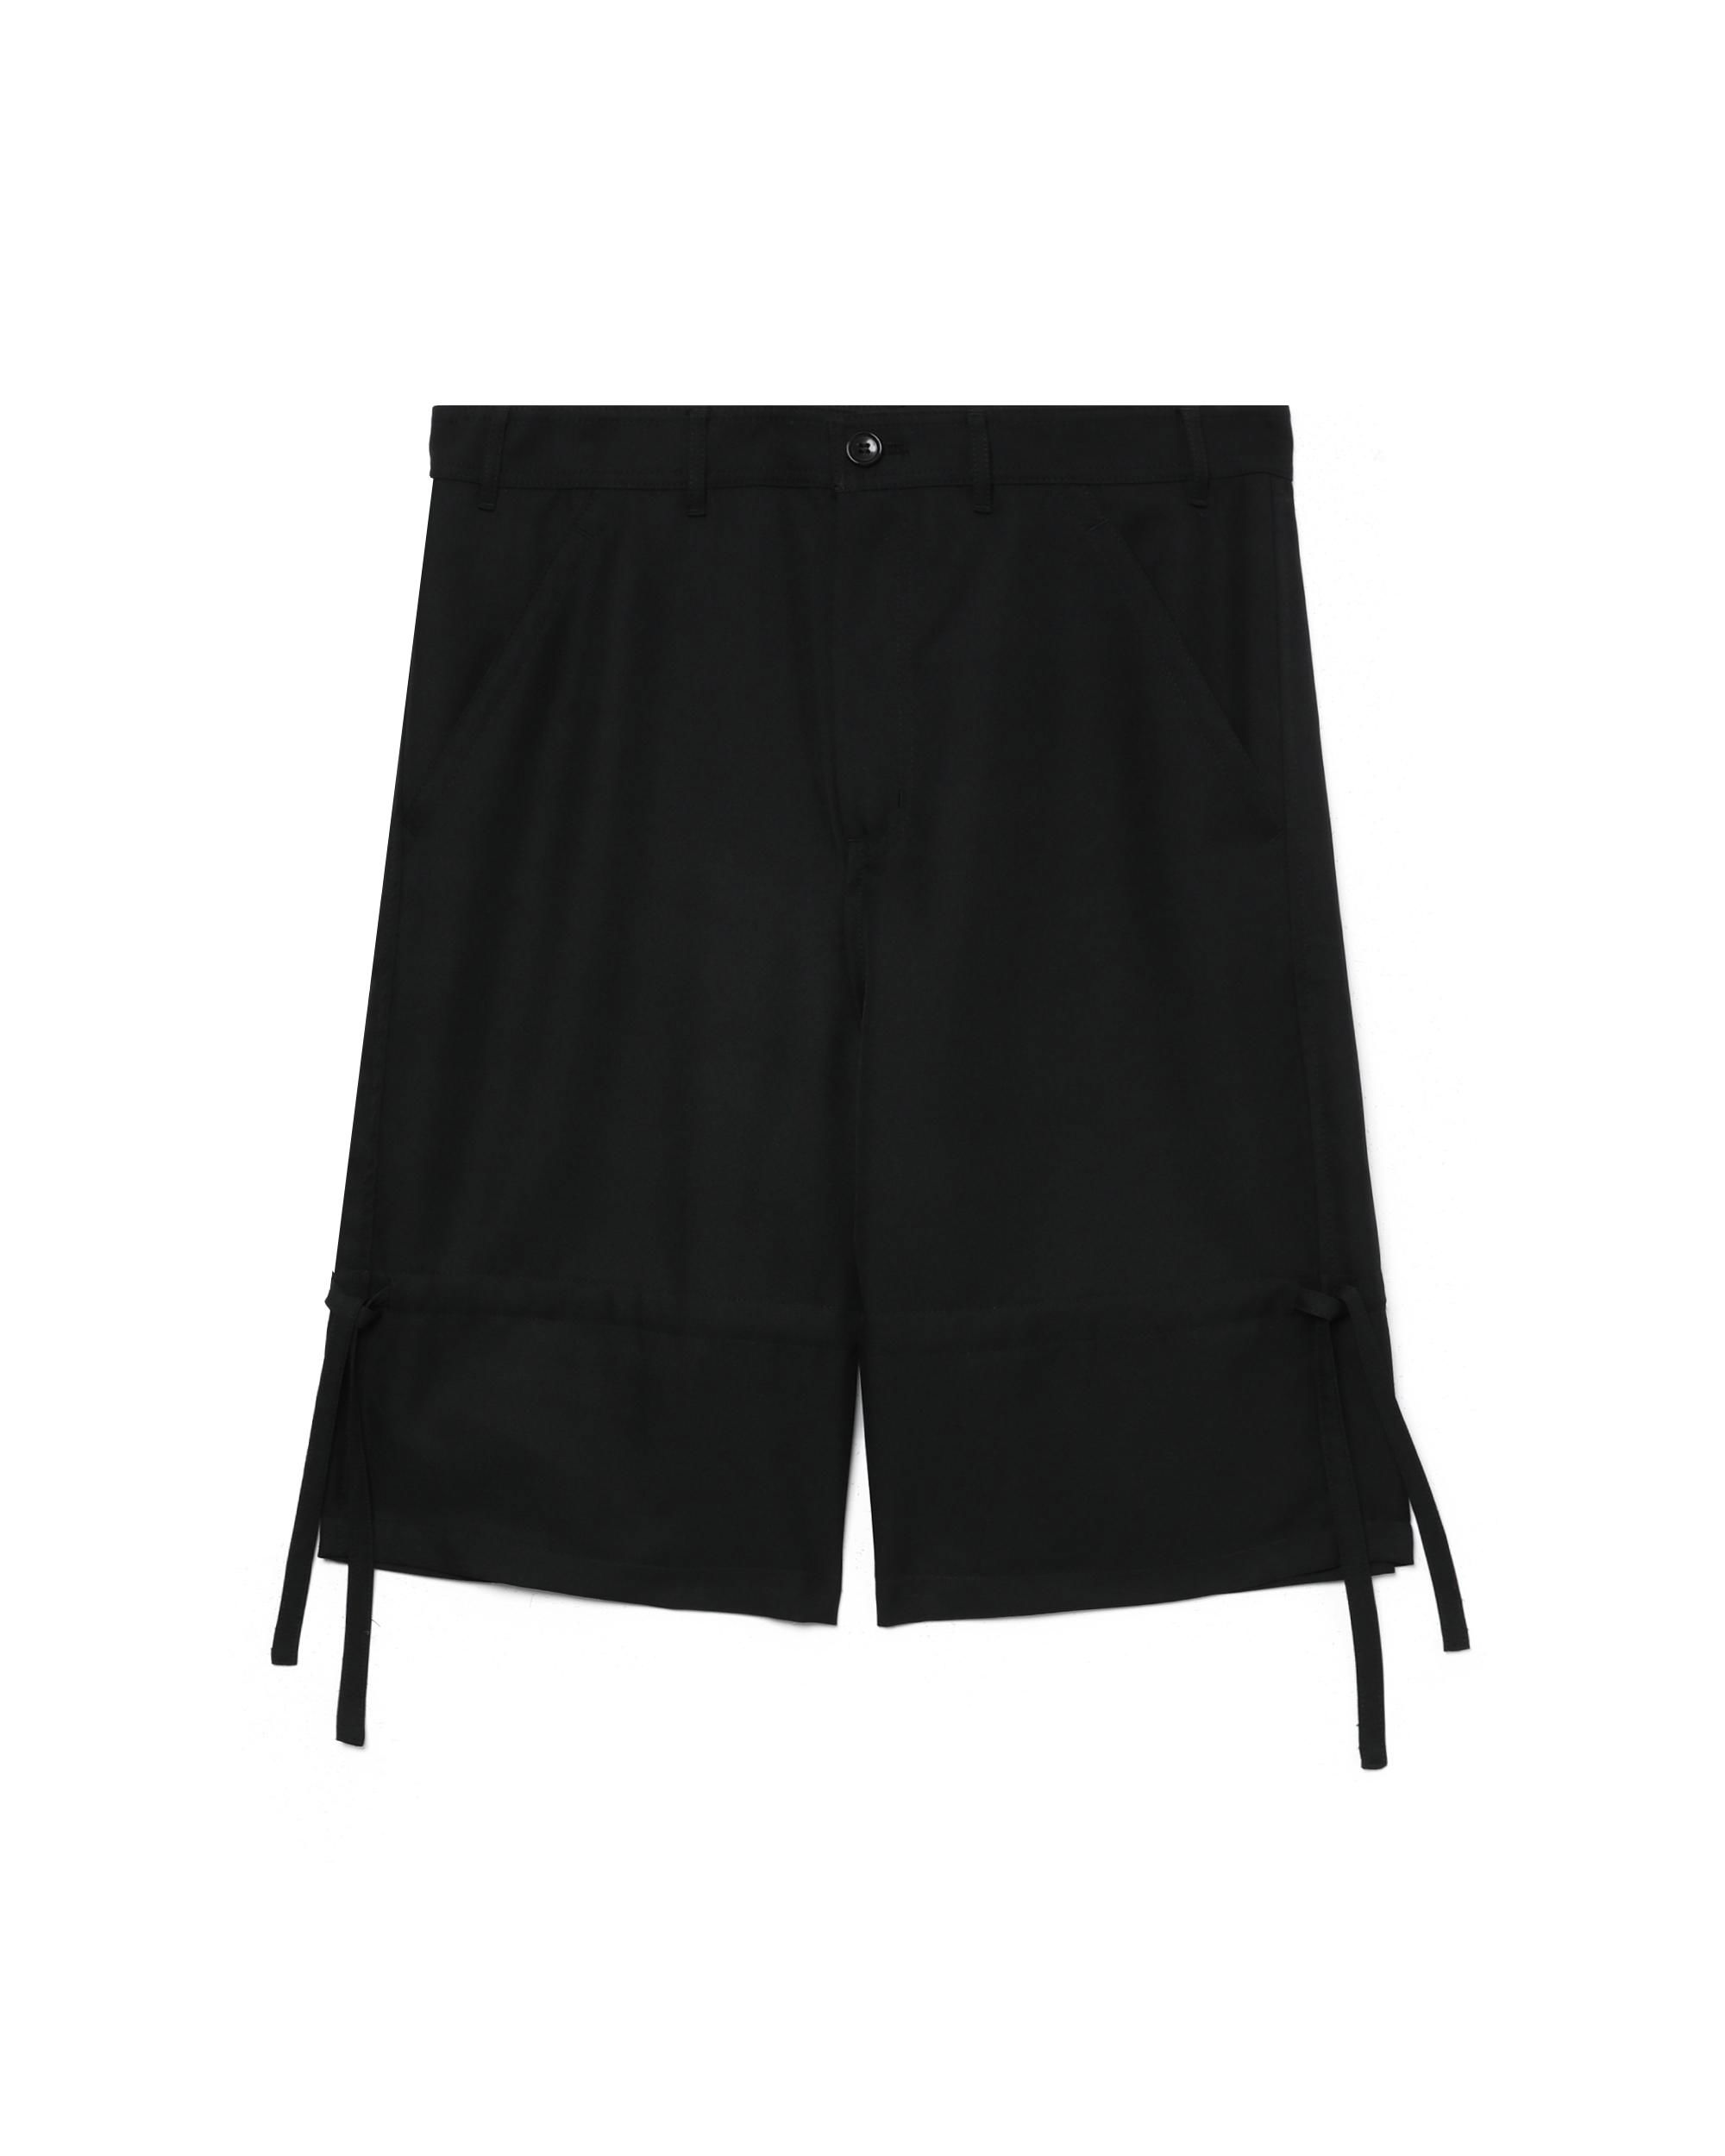 Side strap detail shorts by COMME DES GARCONS